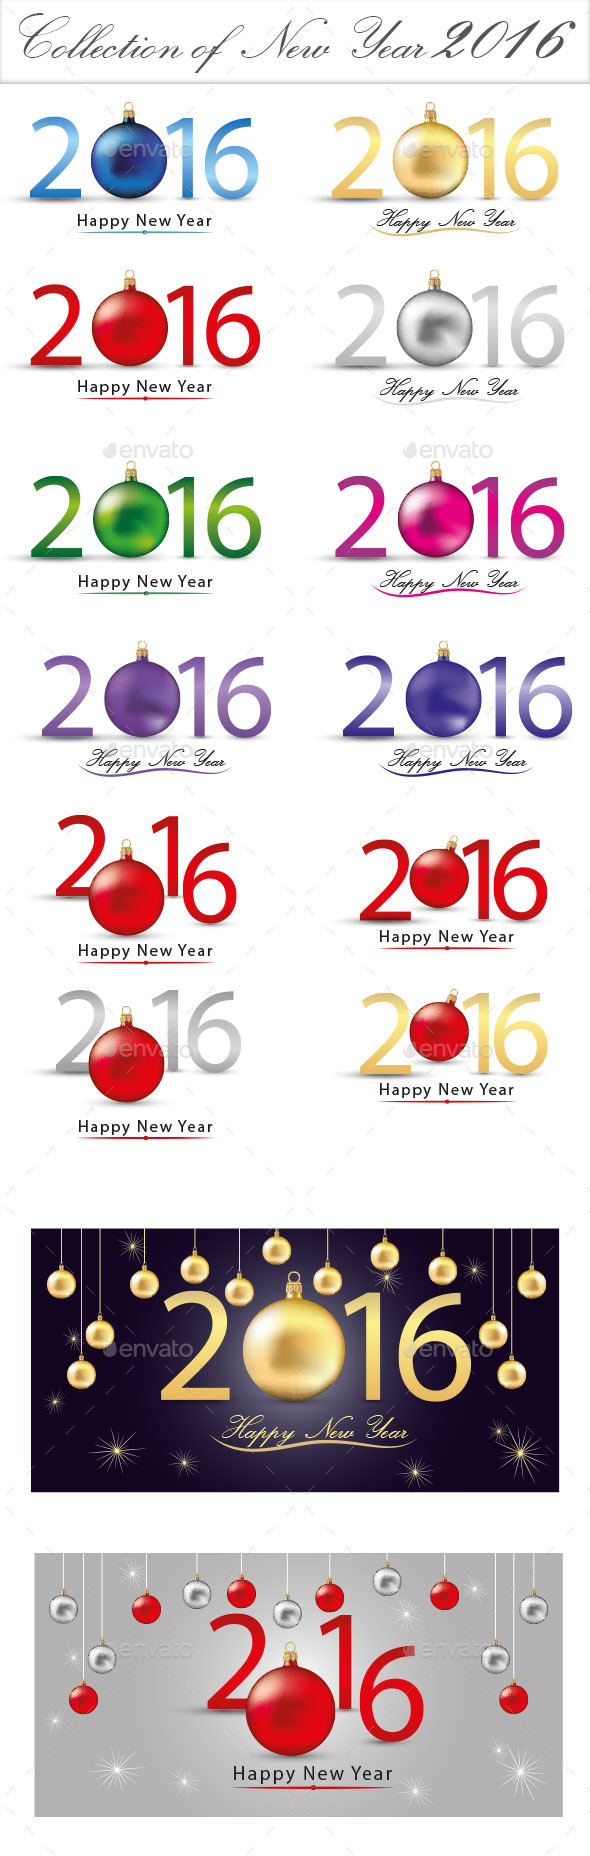 Collection of New Year 2016